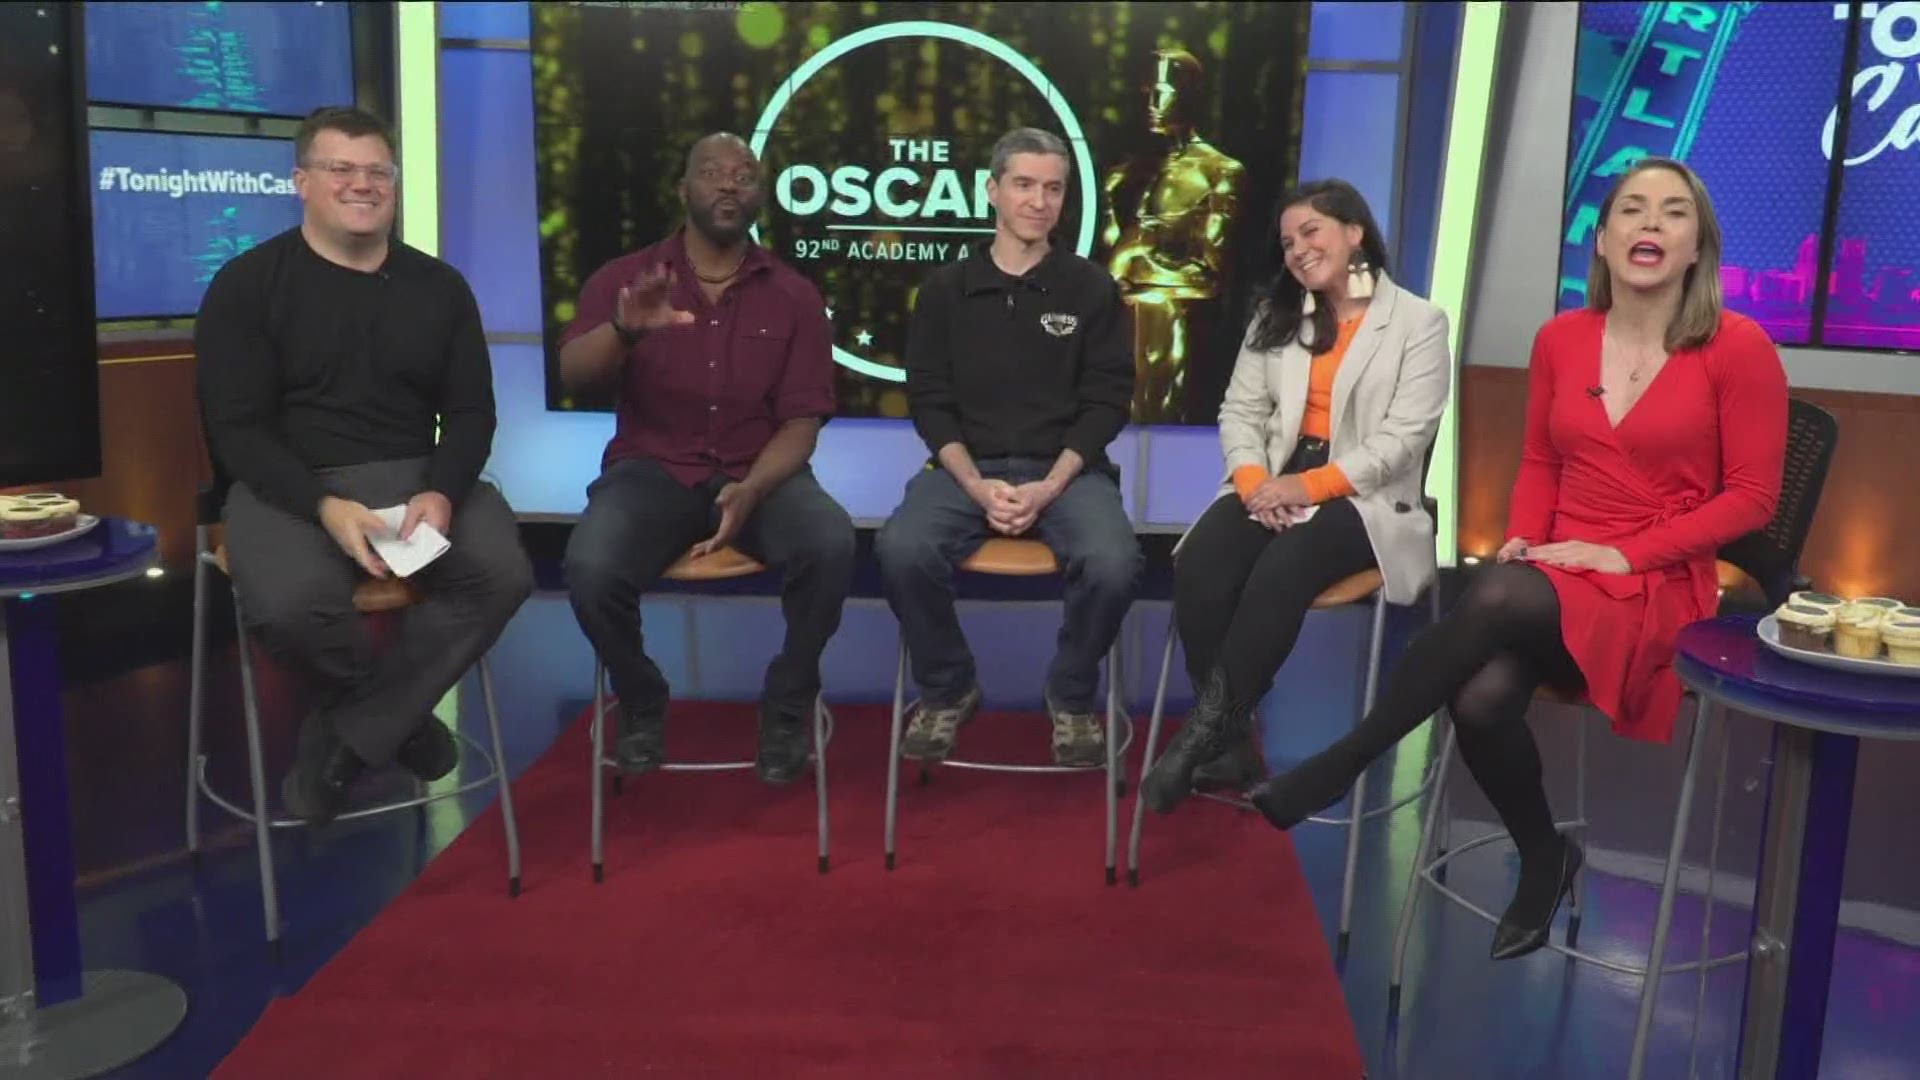 Who do you think will win Best Picture at the Oscars this weekend?
#TonightwithCassidy